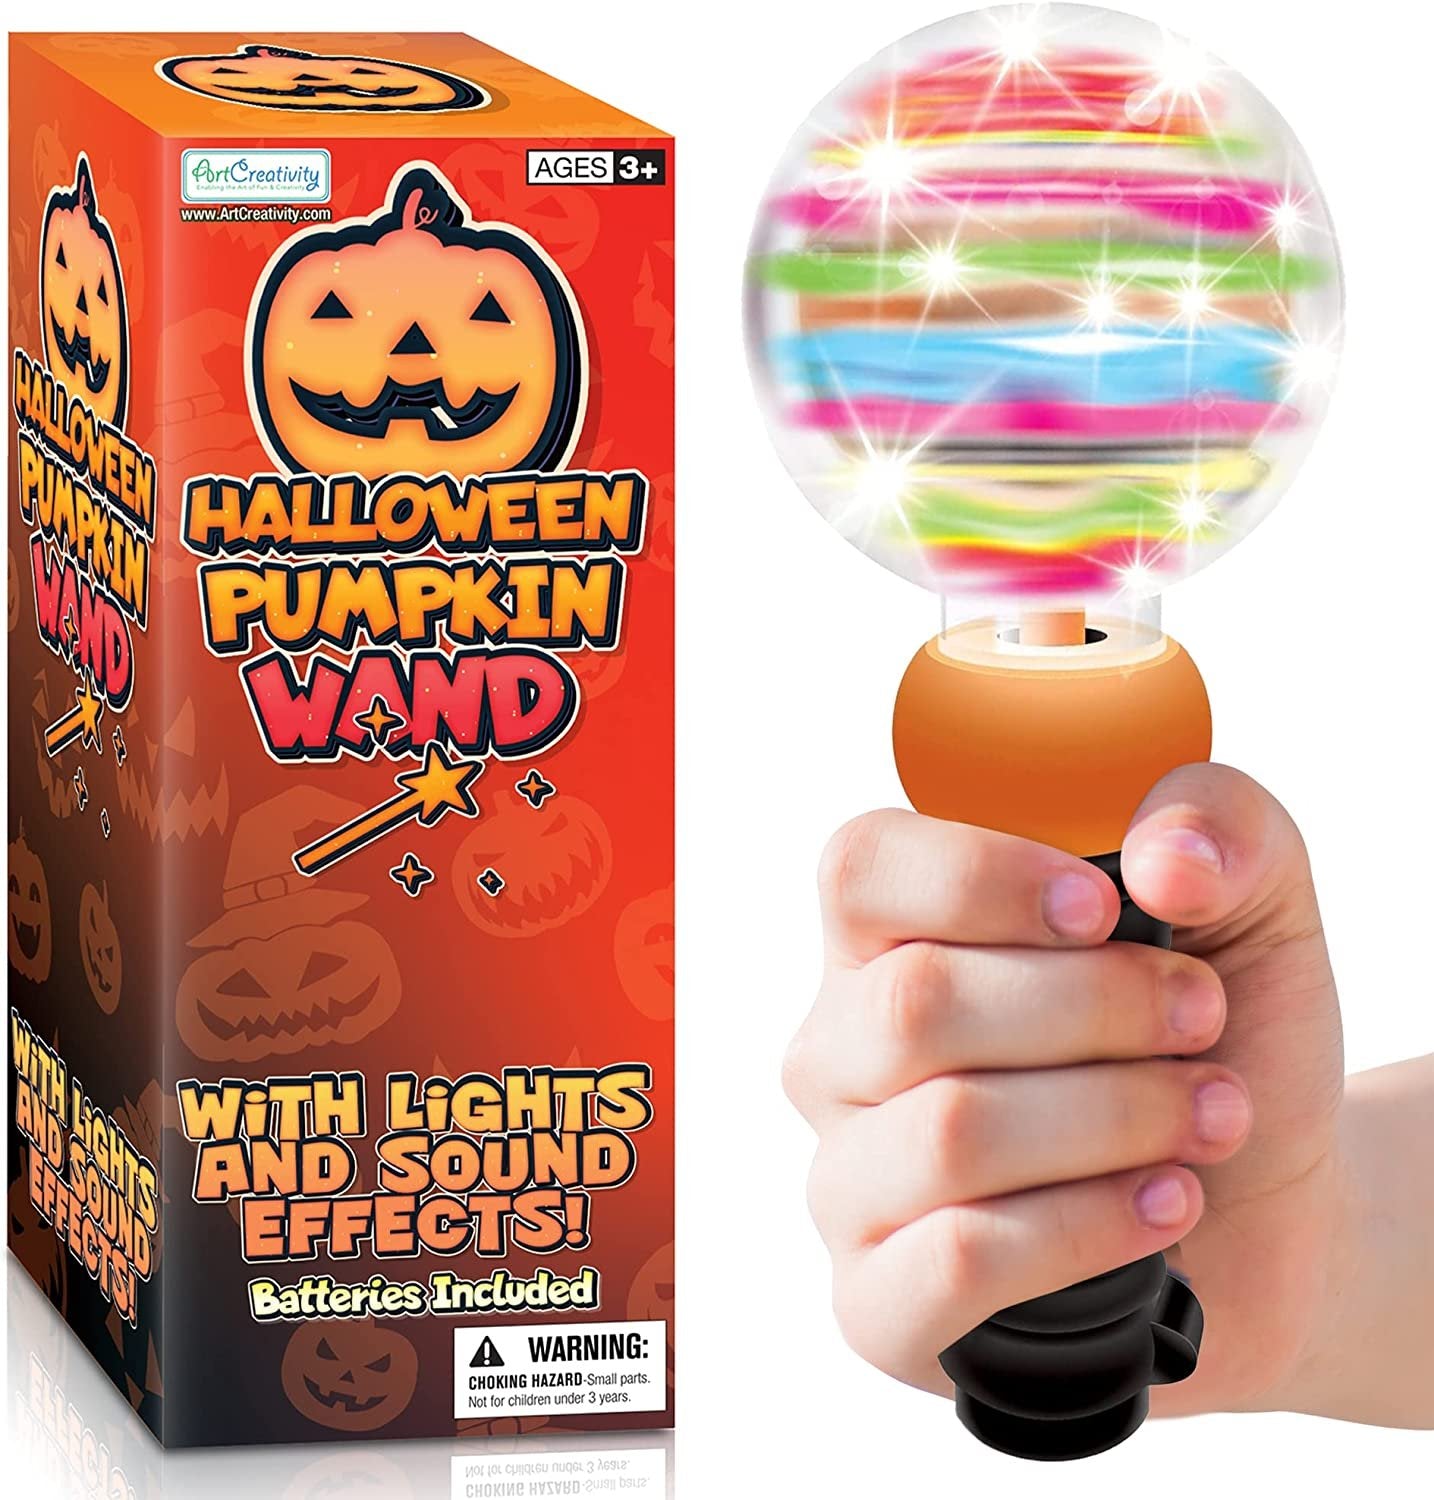 Light-Up Halloween Pumpkin Magic Wand Toy with Sound, Jack-O-Lantern Light Up Toys for Kids, with Light Up & Spinning & Sound Effects, for Kids, Halloween Party Favor